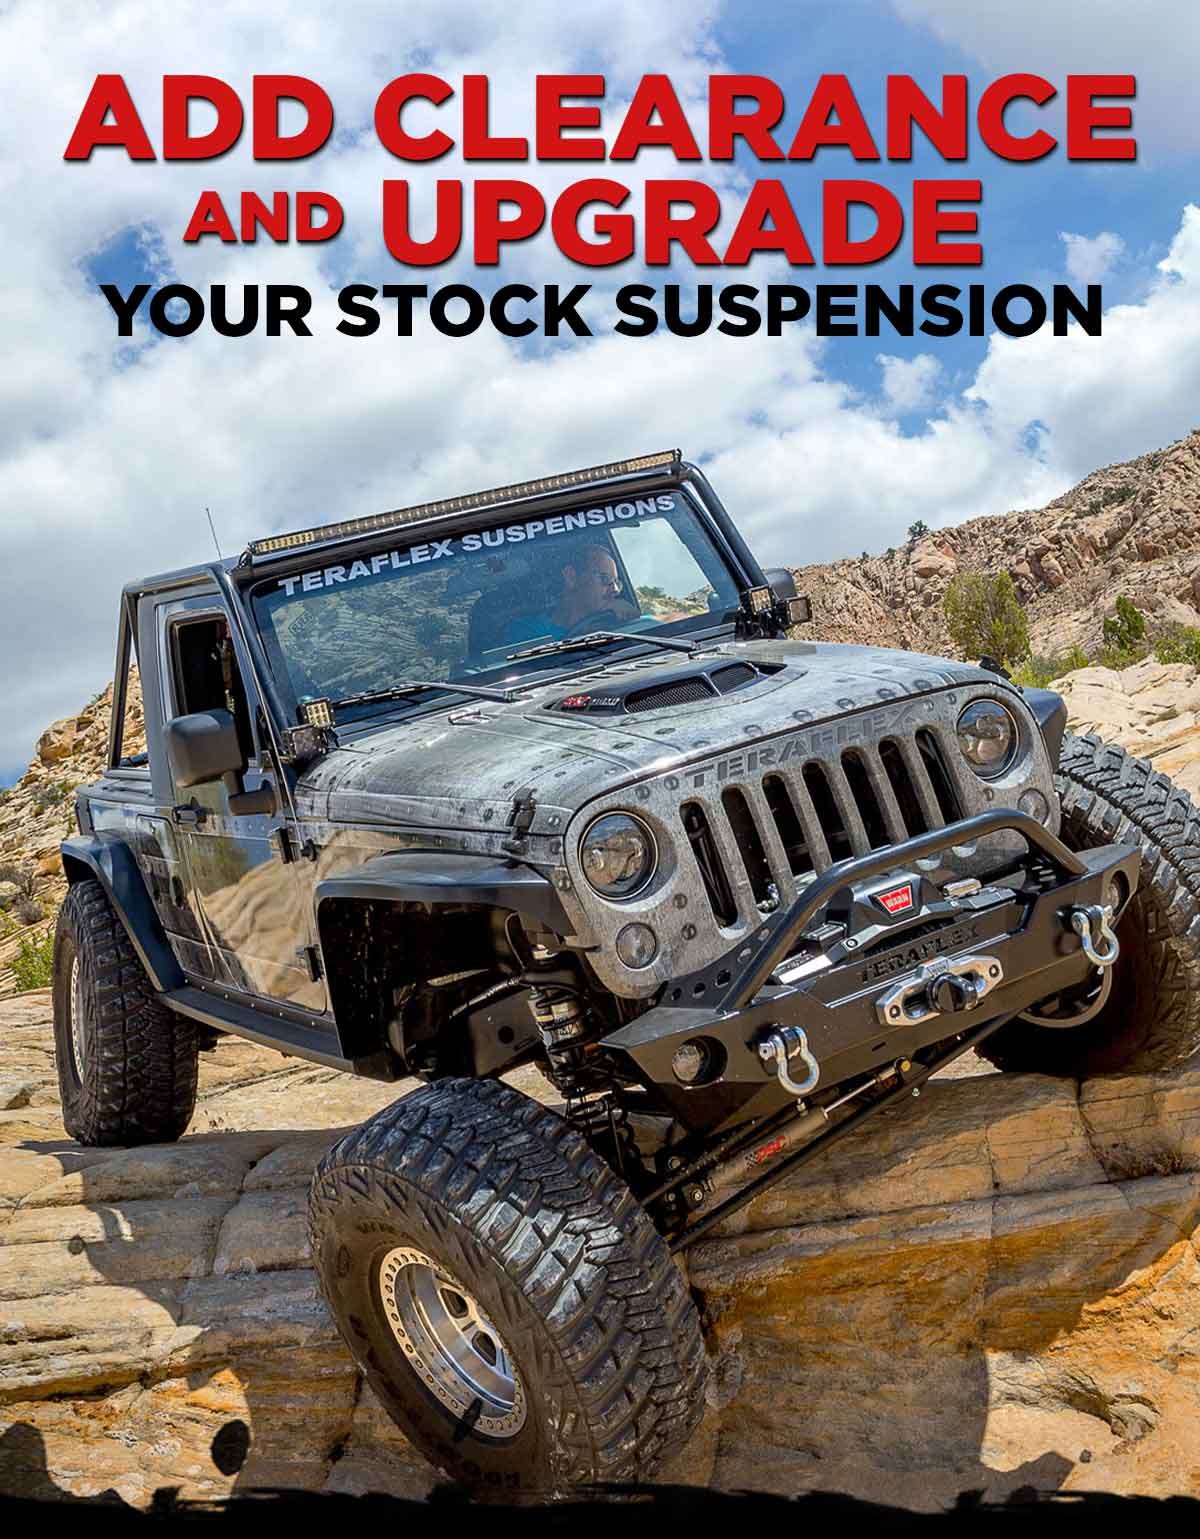 Add Clearance and Upgrade Your Stock Suspension